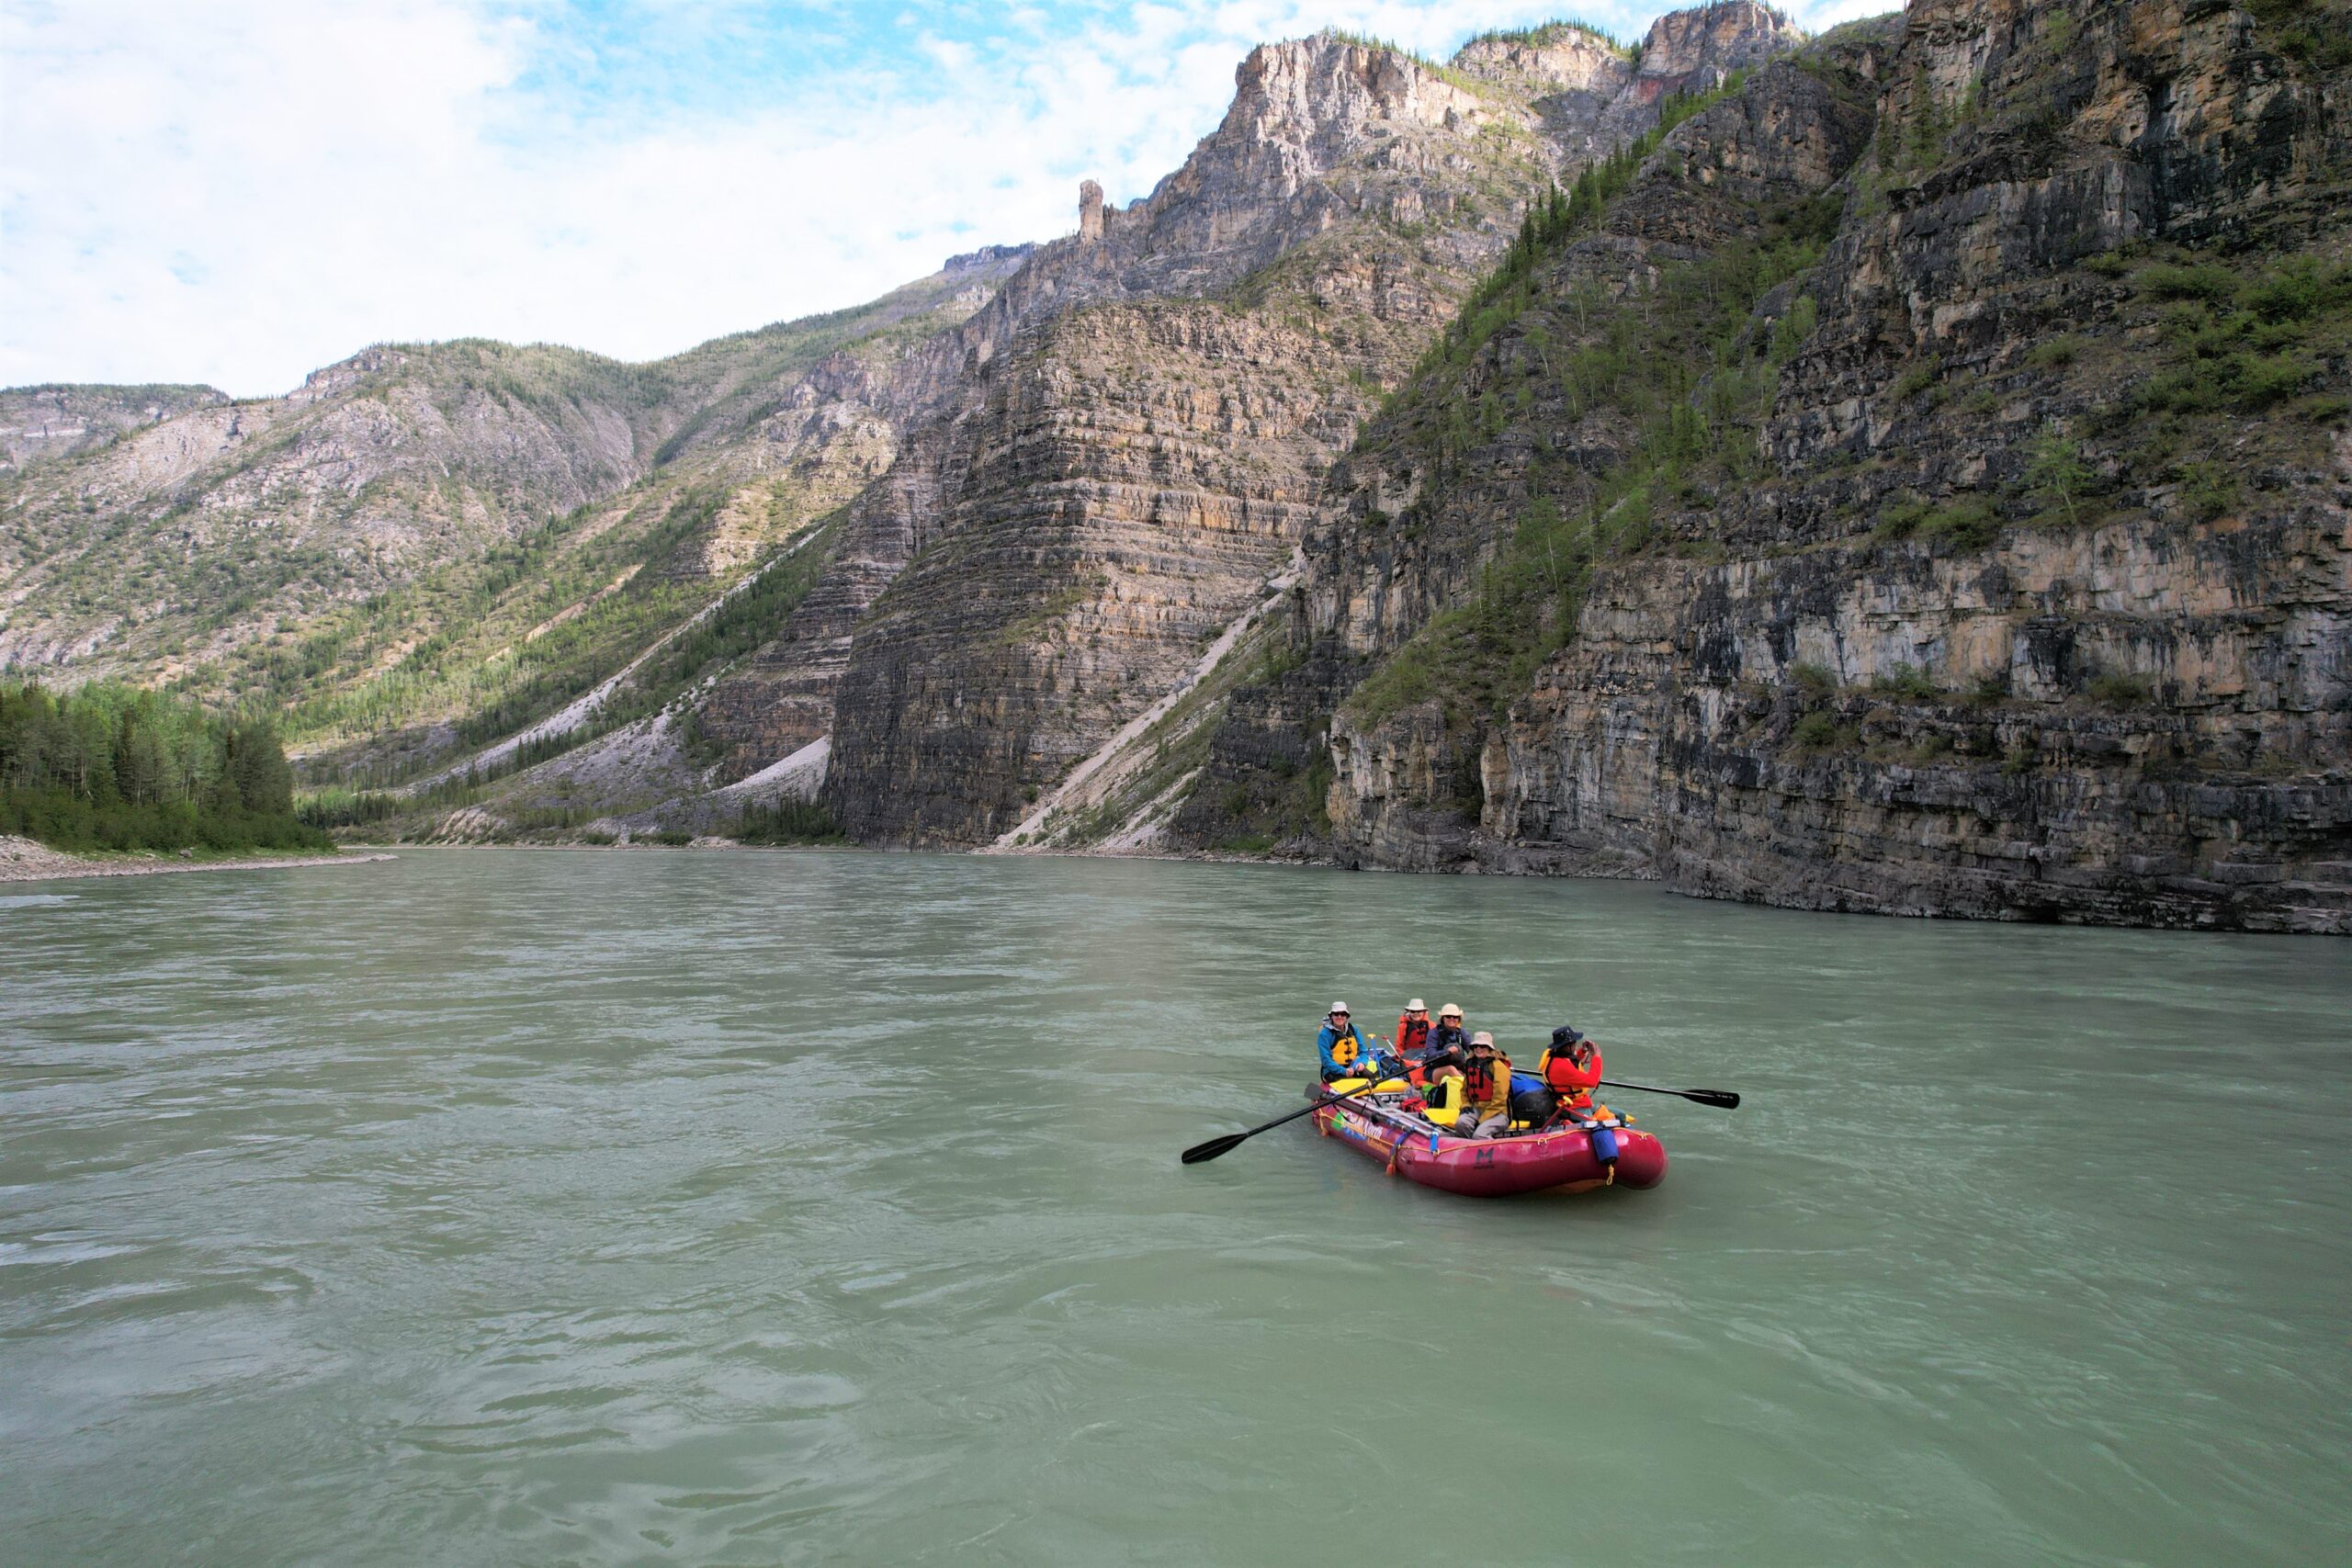 A raft floats through Third Canyon on the Nahanni River in Canada's Northwest Territories.